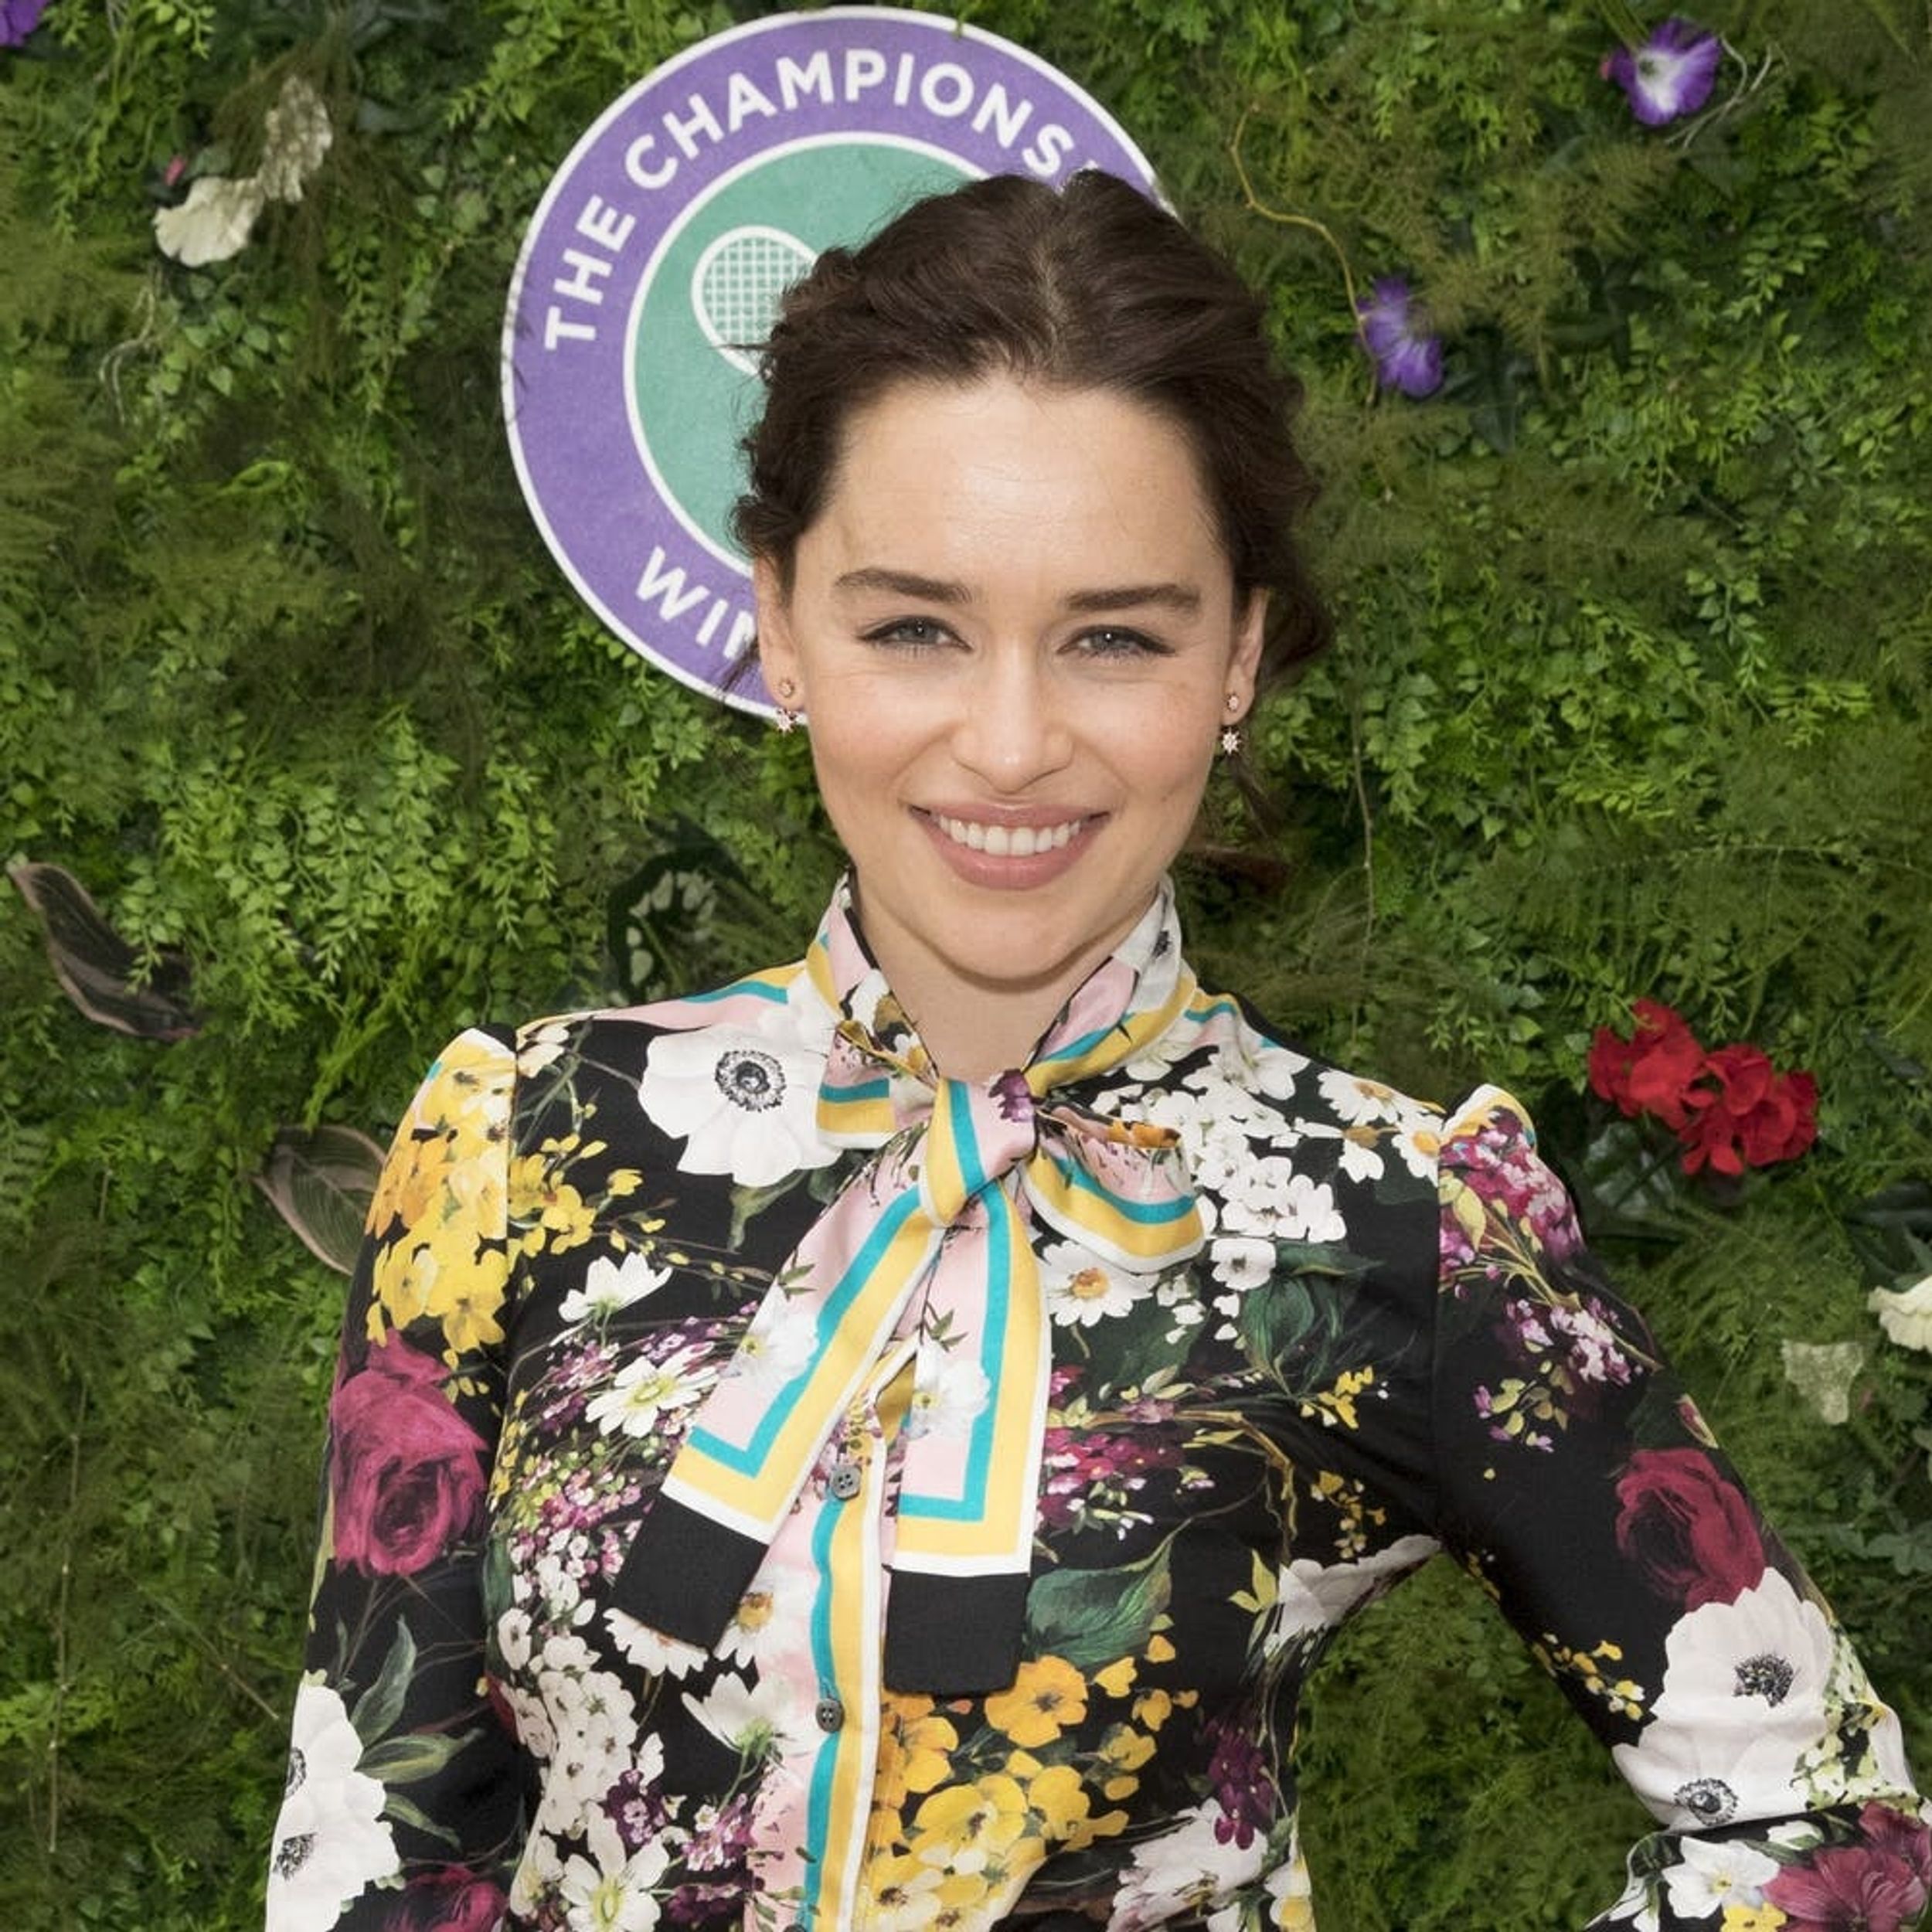 Emilia Clarke Just Took the Plunge and Bleached Her Hair Platinum Blonde